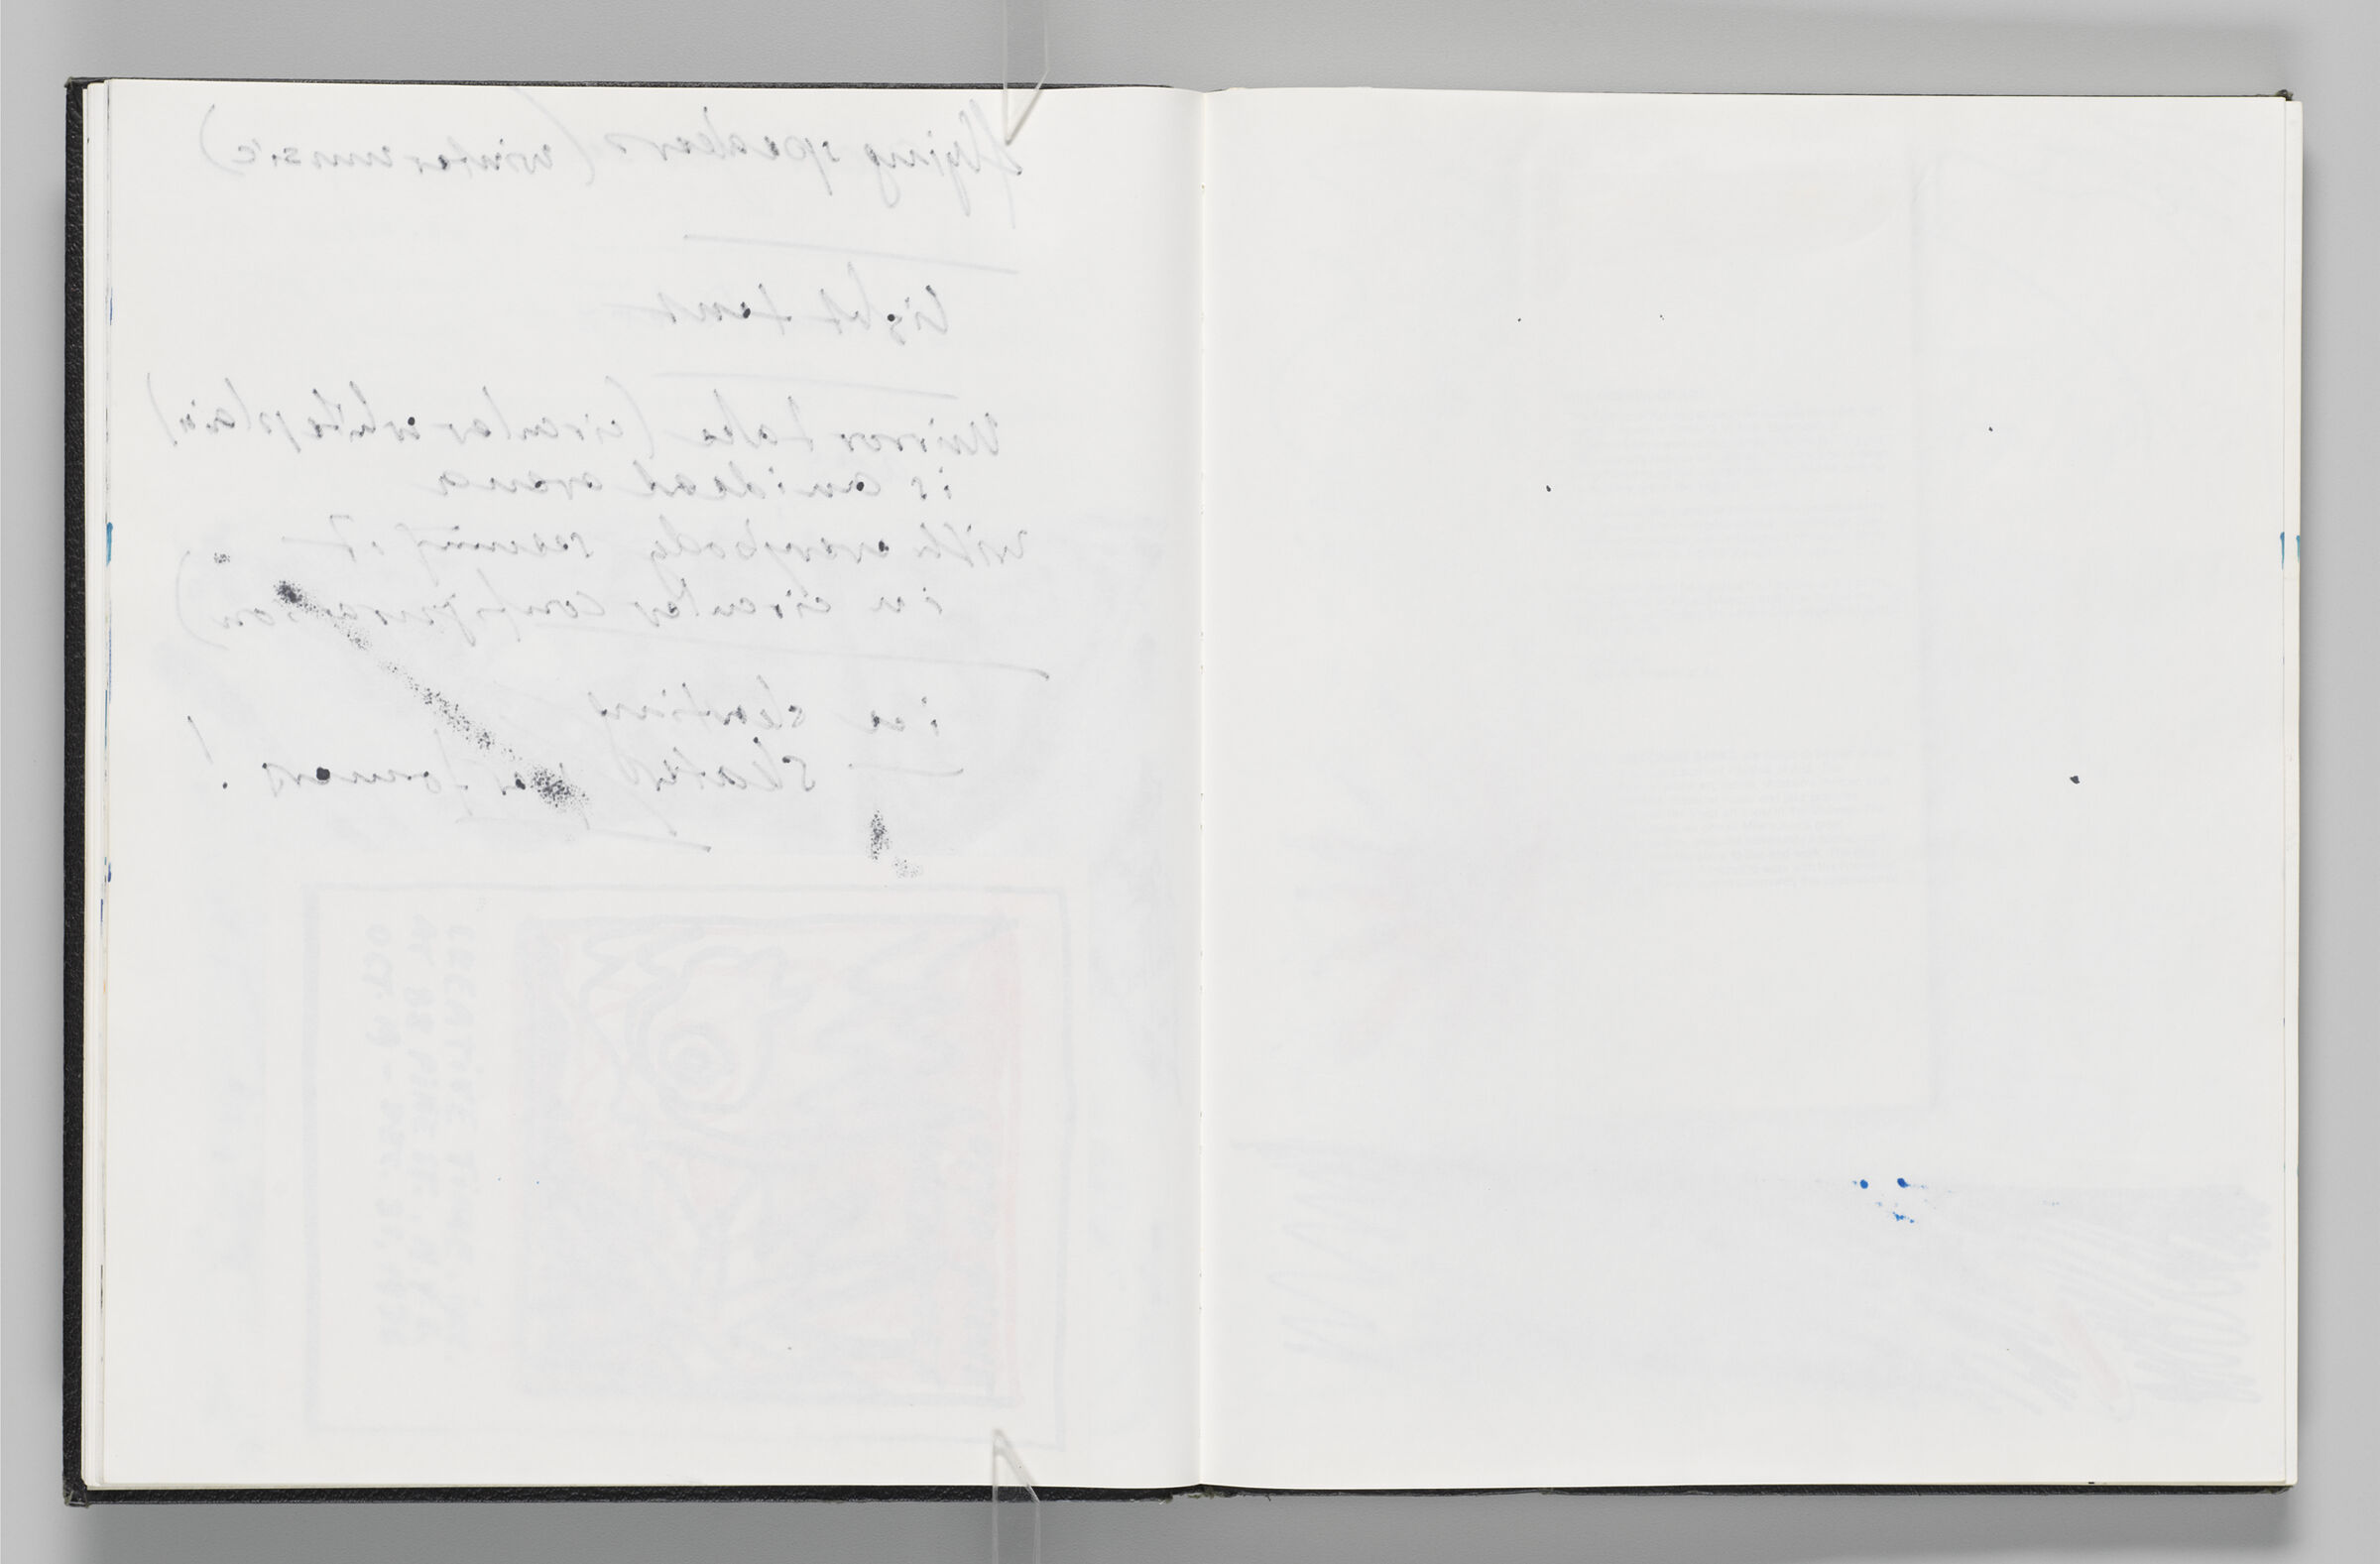 Untitled (Bleed-Through Of Previous Page, Left Page); Untitled (Blank With Faint Color Transfer, Right Page)